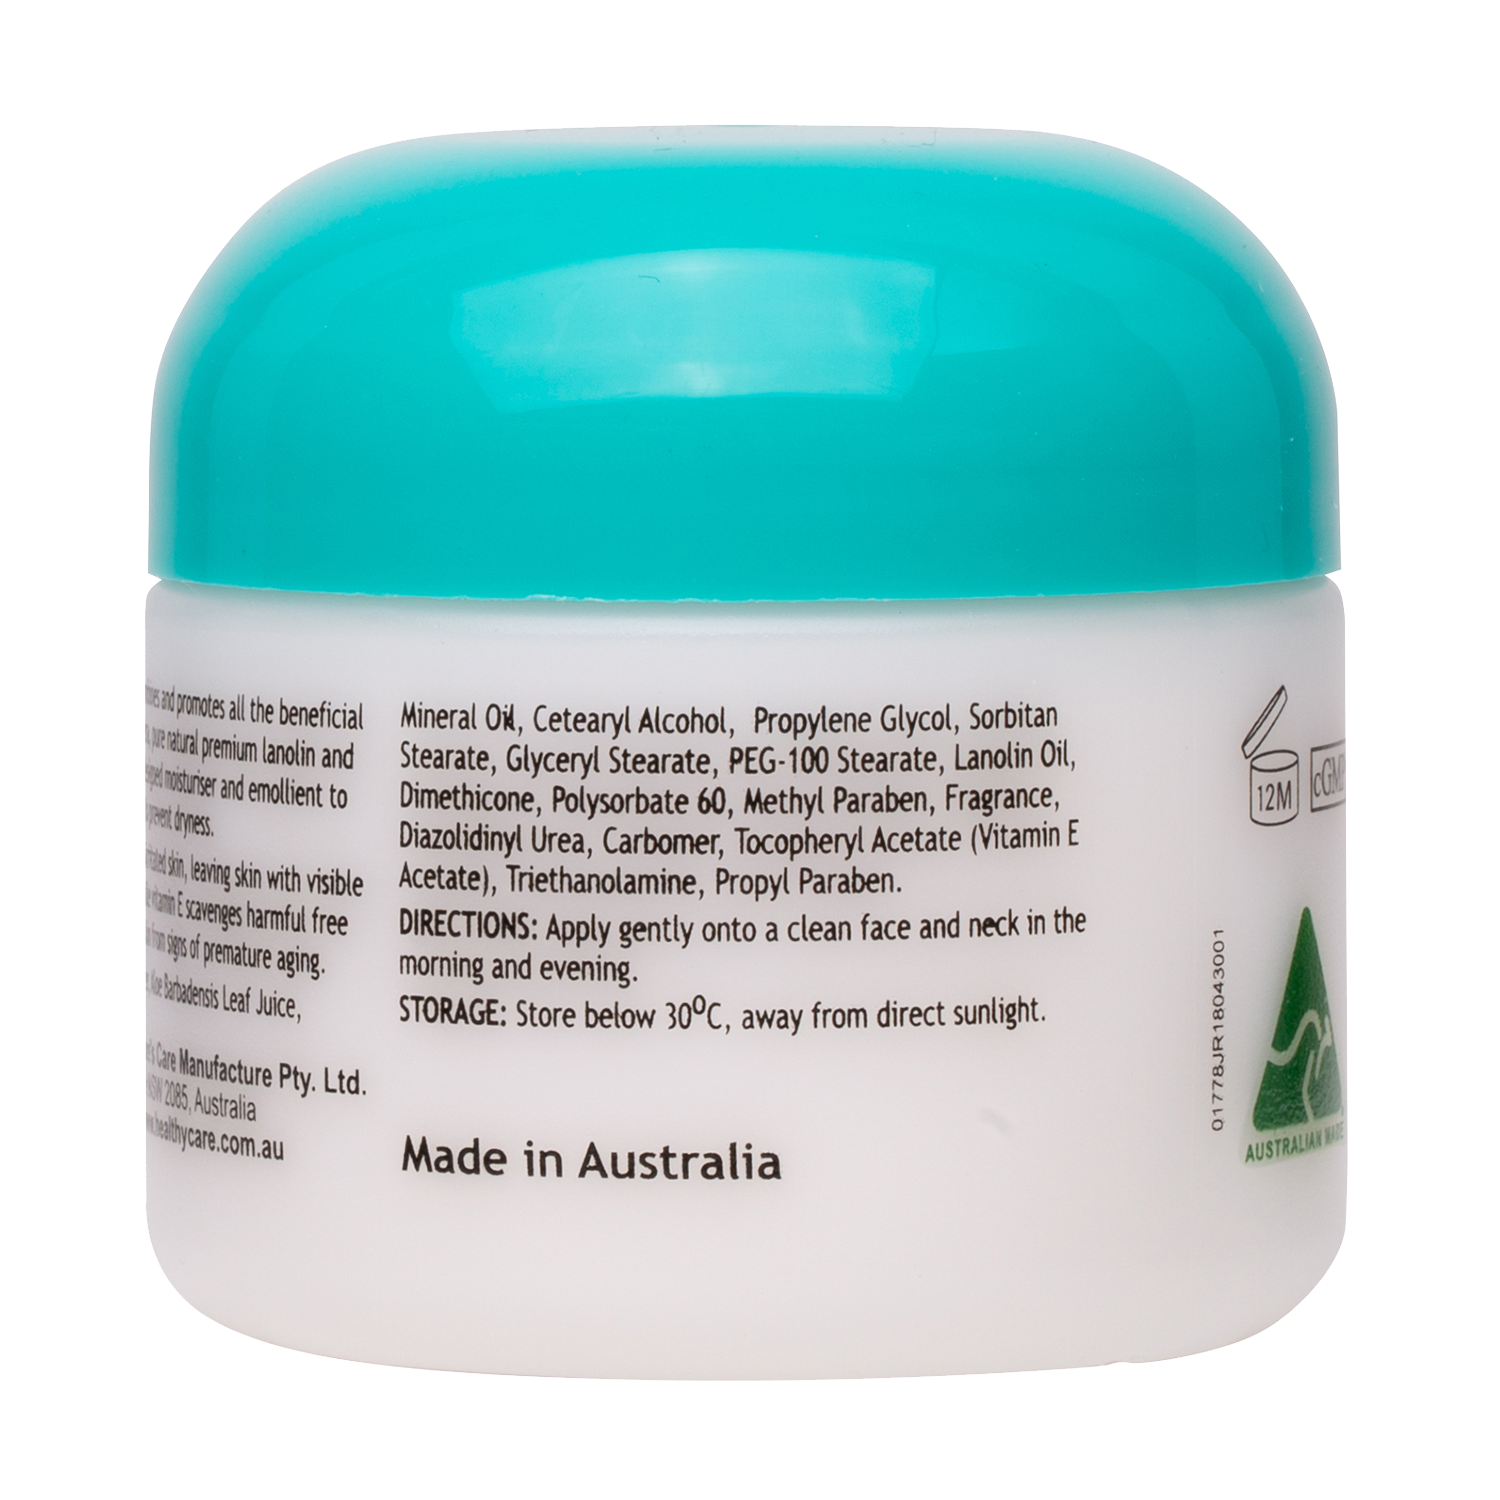 Ingredients, Directions and Storage of 100g Aloe Vera Cream-Lotion & Moisturizer-Healthy Care Australia